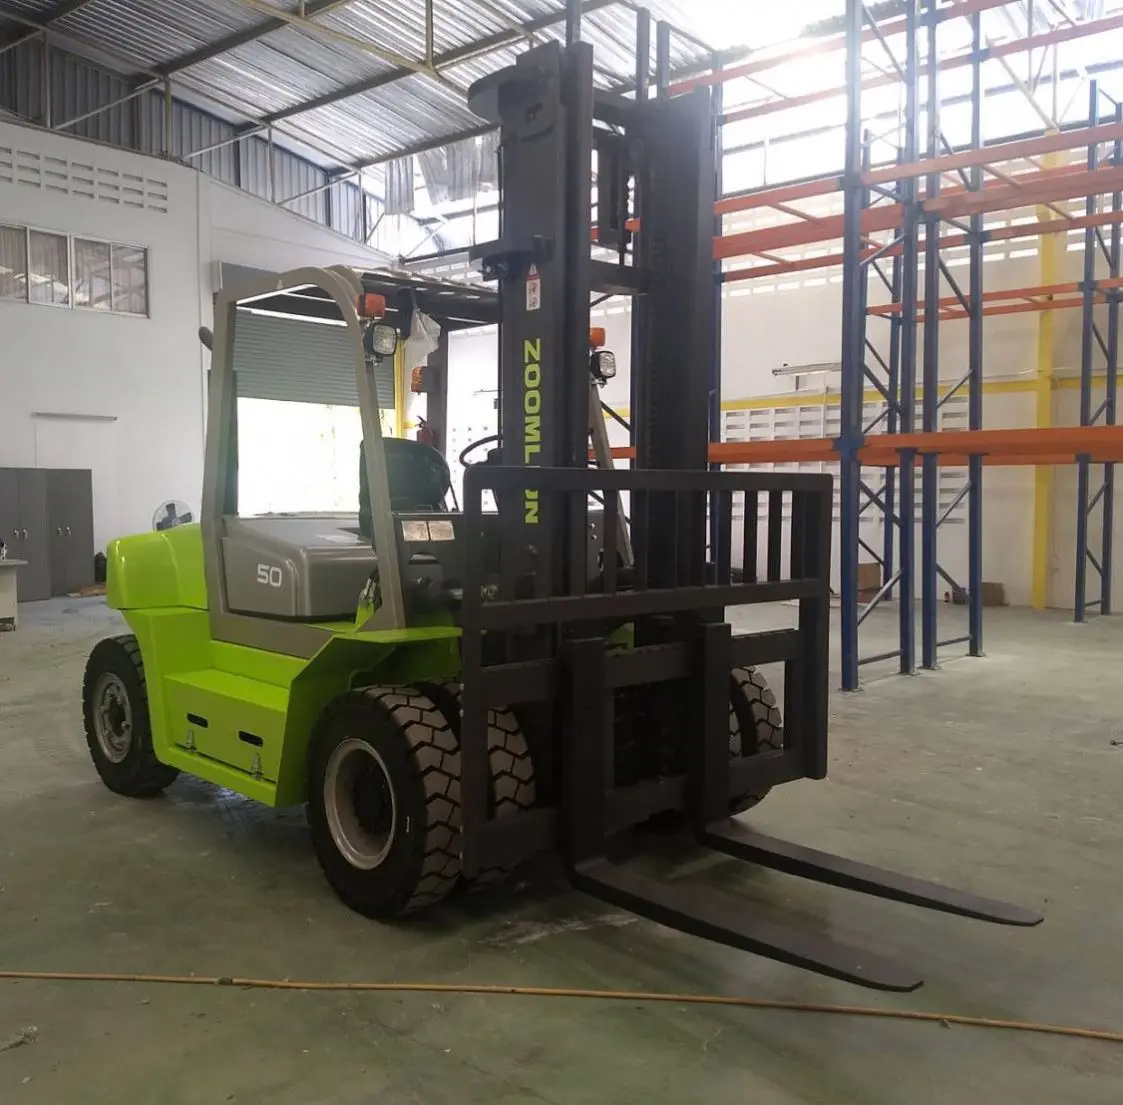 2T 3T 2.5T Lpg Forklift Truck 2 Ton 3 Ton 2.5 Ton Lpg Forklift Truck With Side Shifter